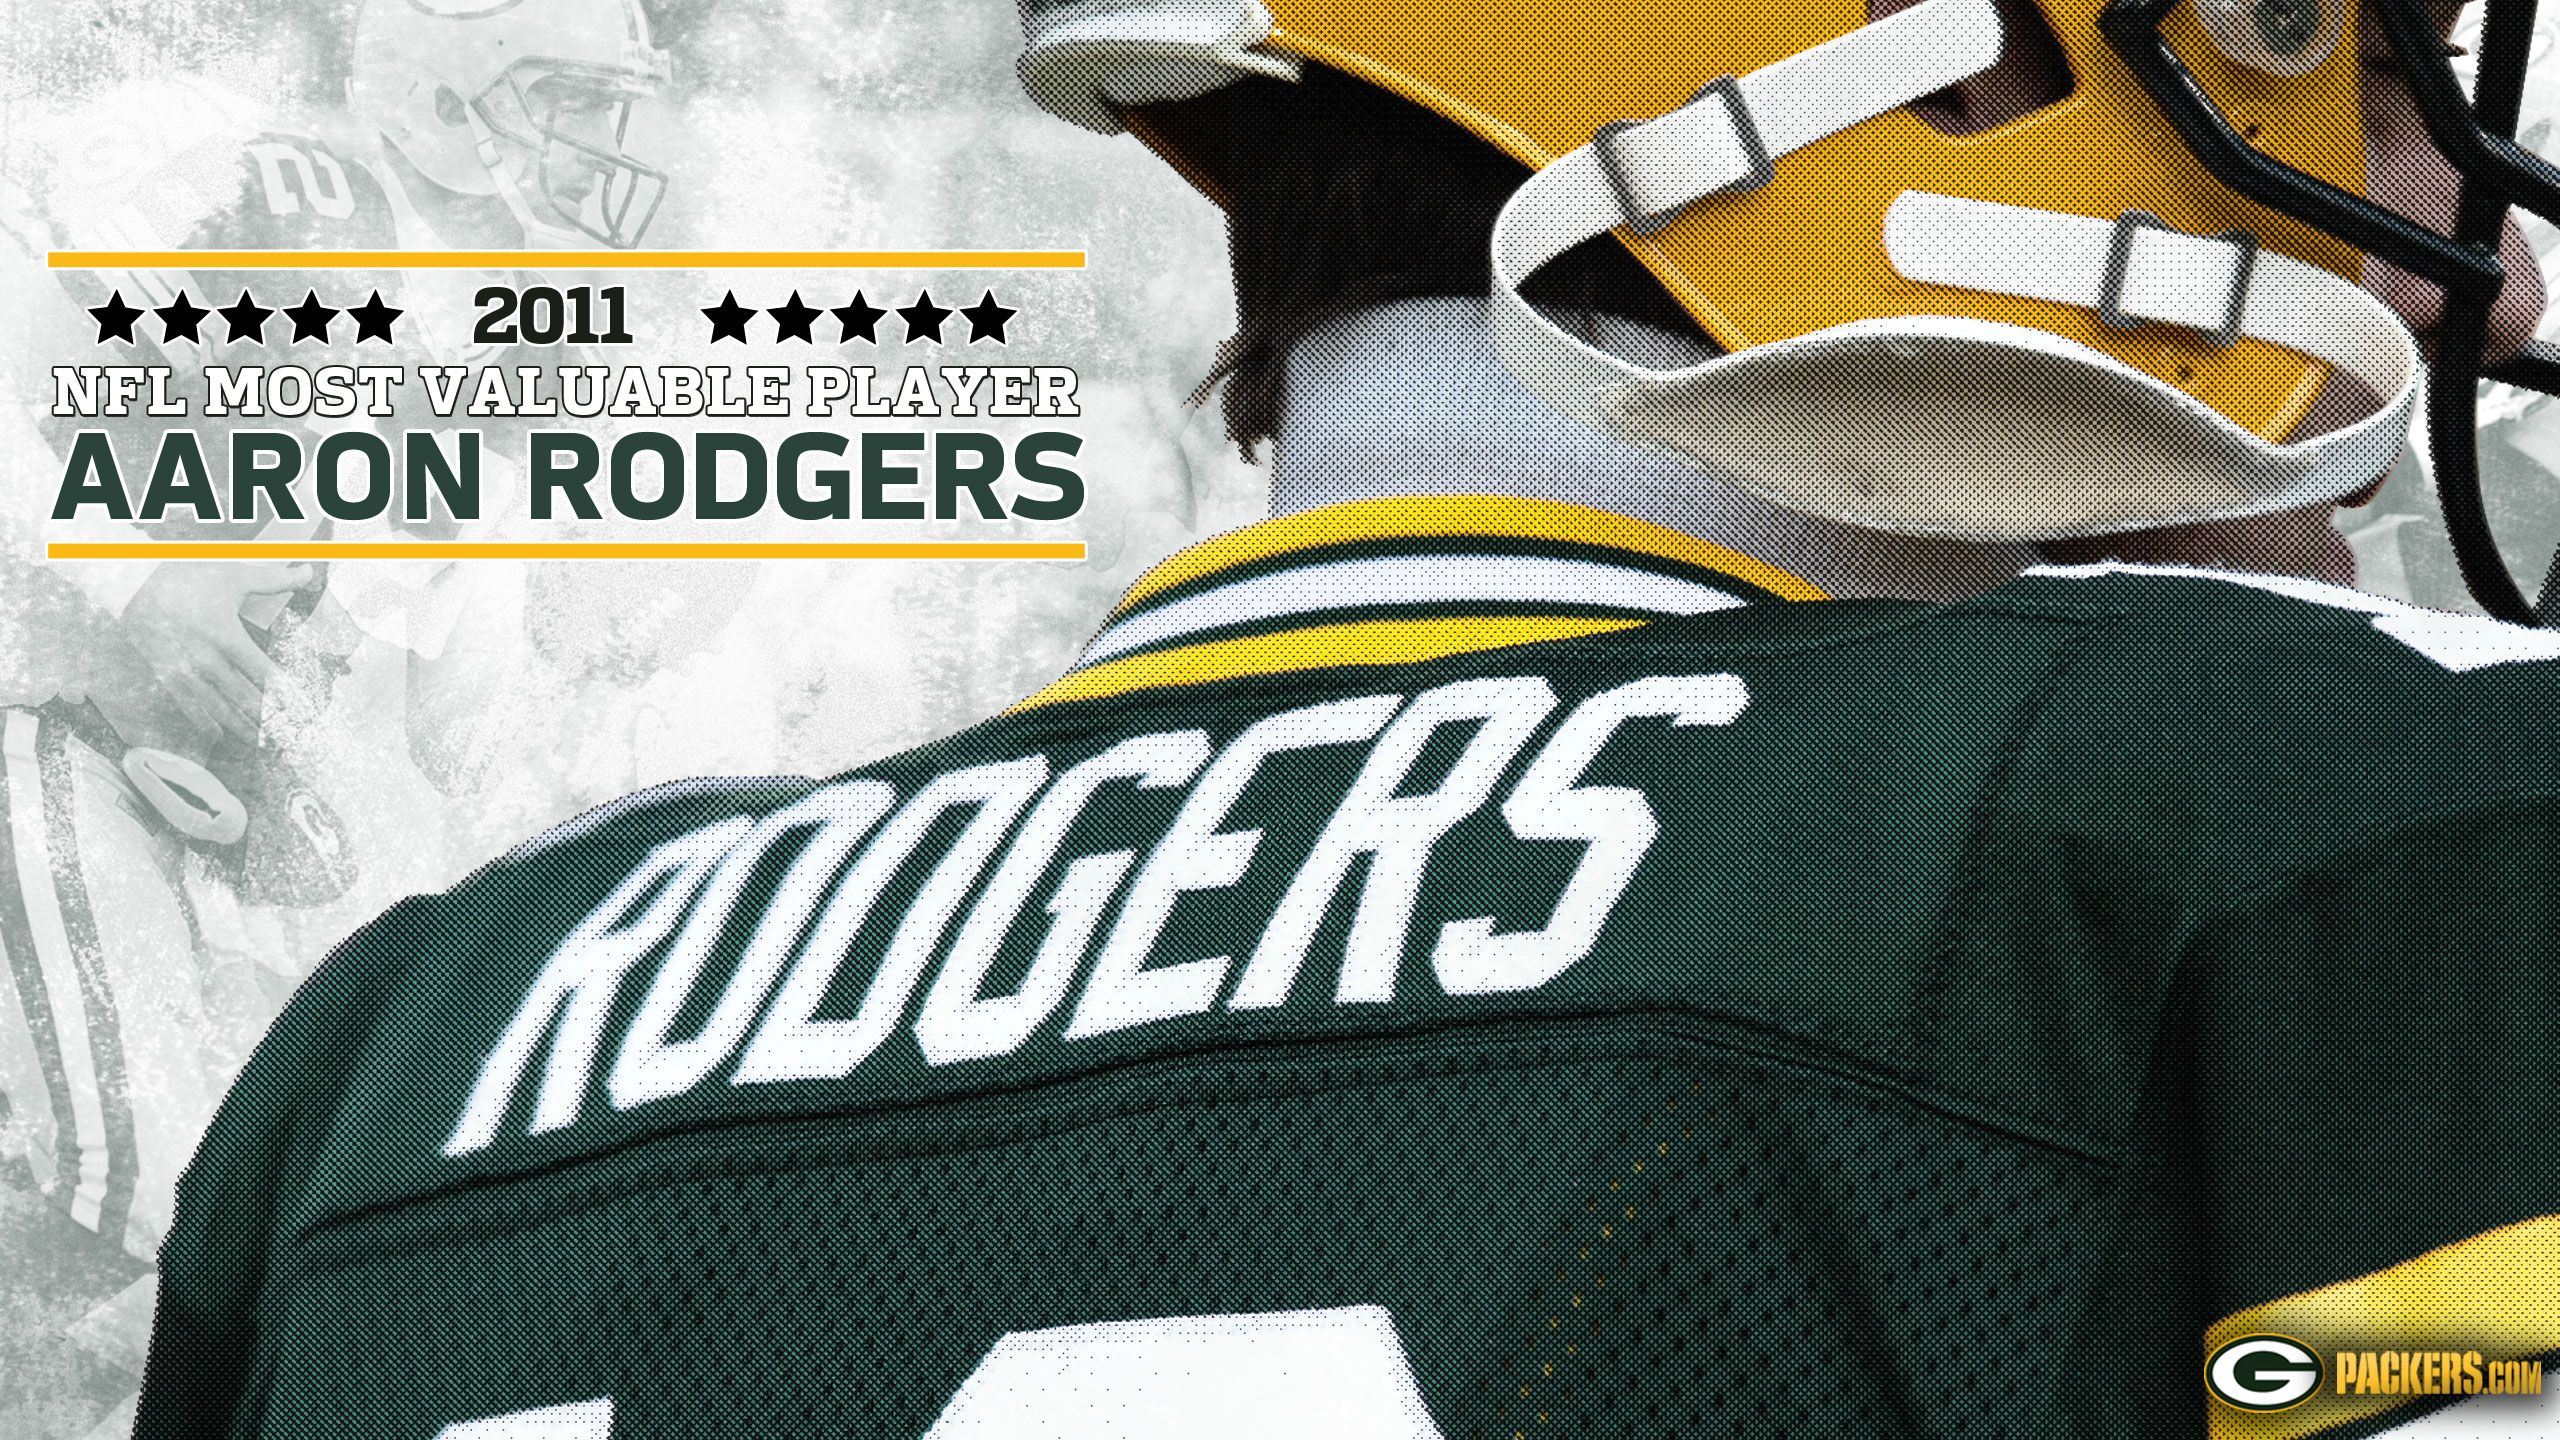 Packers.com Wallpapers 2011 Miscellaneous